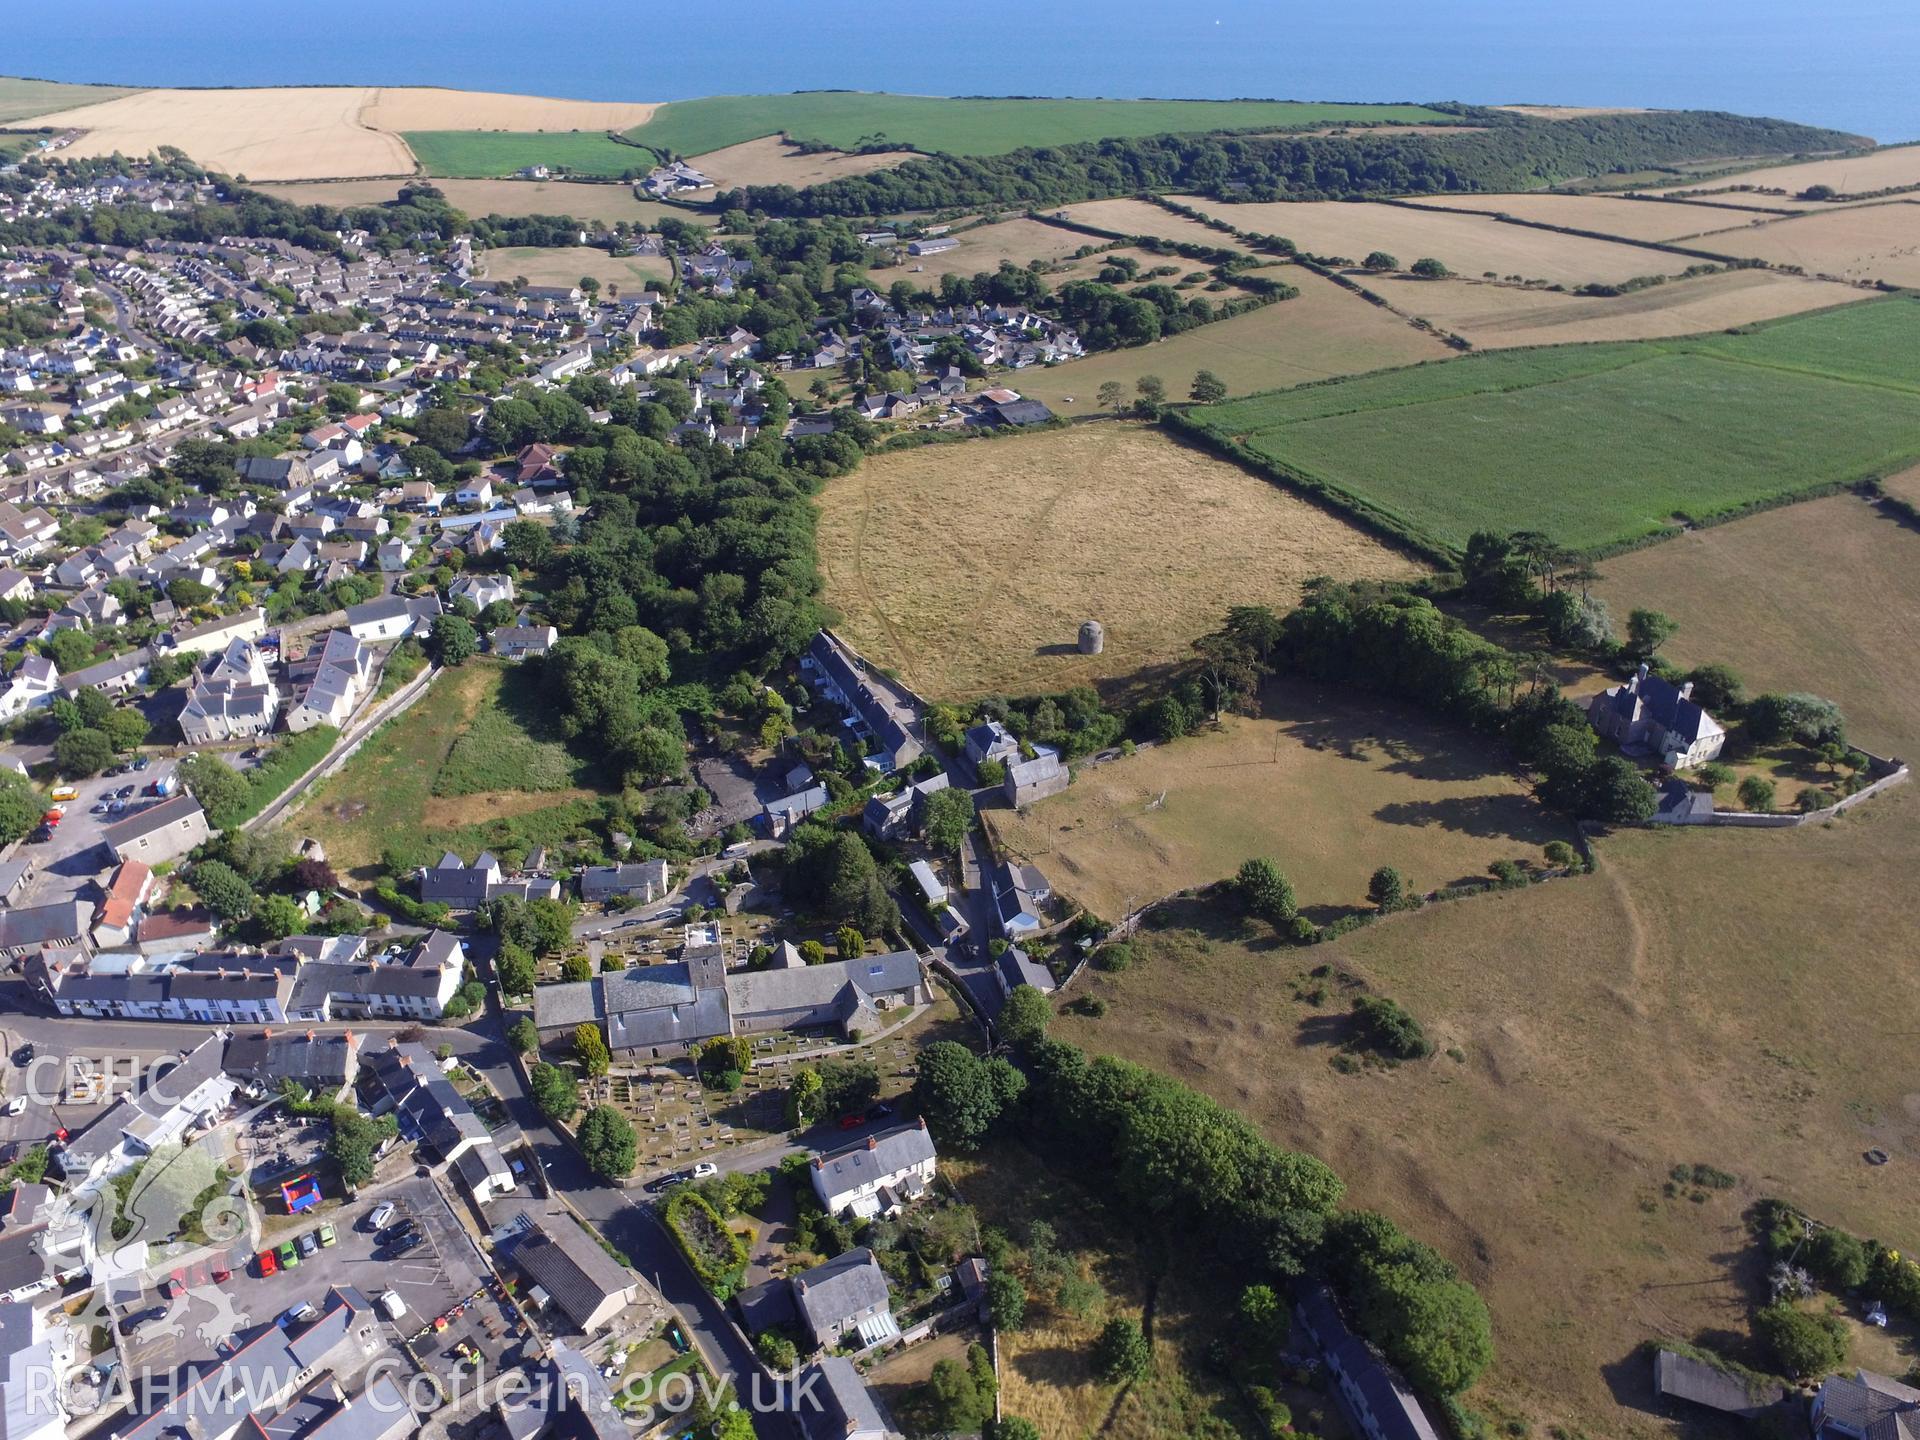 The town of Llantwit Major, St. Illtyd's Church and the site of the Llantwit Major grange. Colour photograph taken by Paul R. Davis on 25th July 2018.